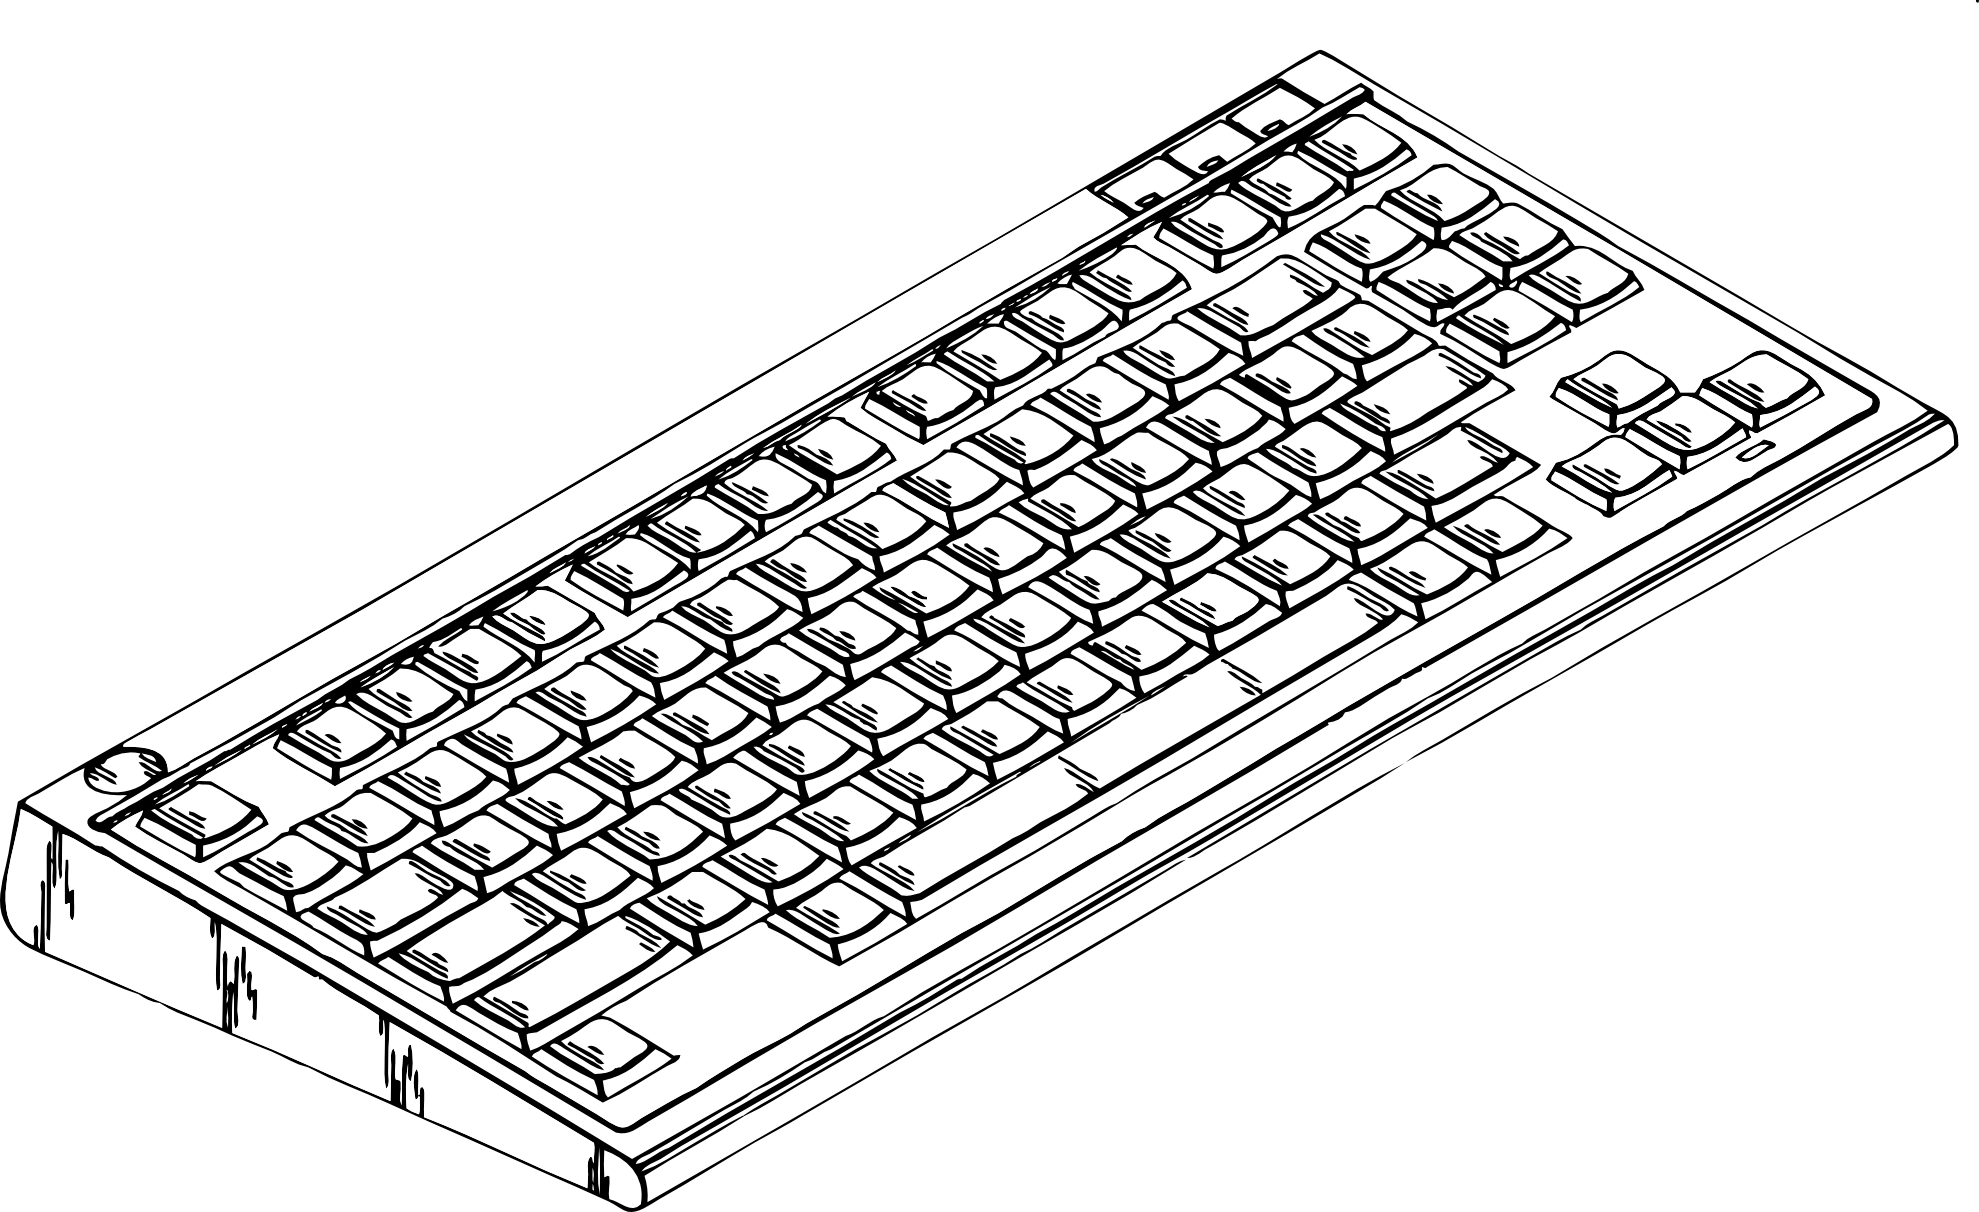 Computer and keyboard clipart